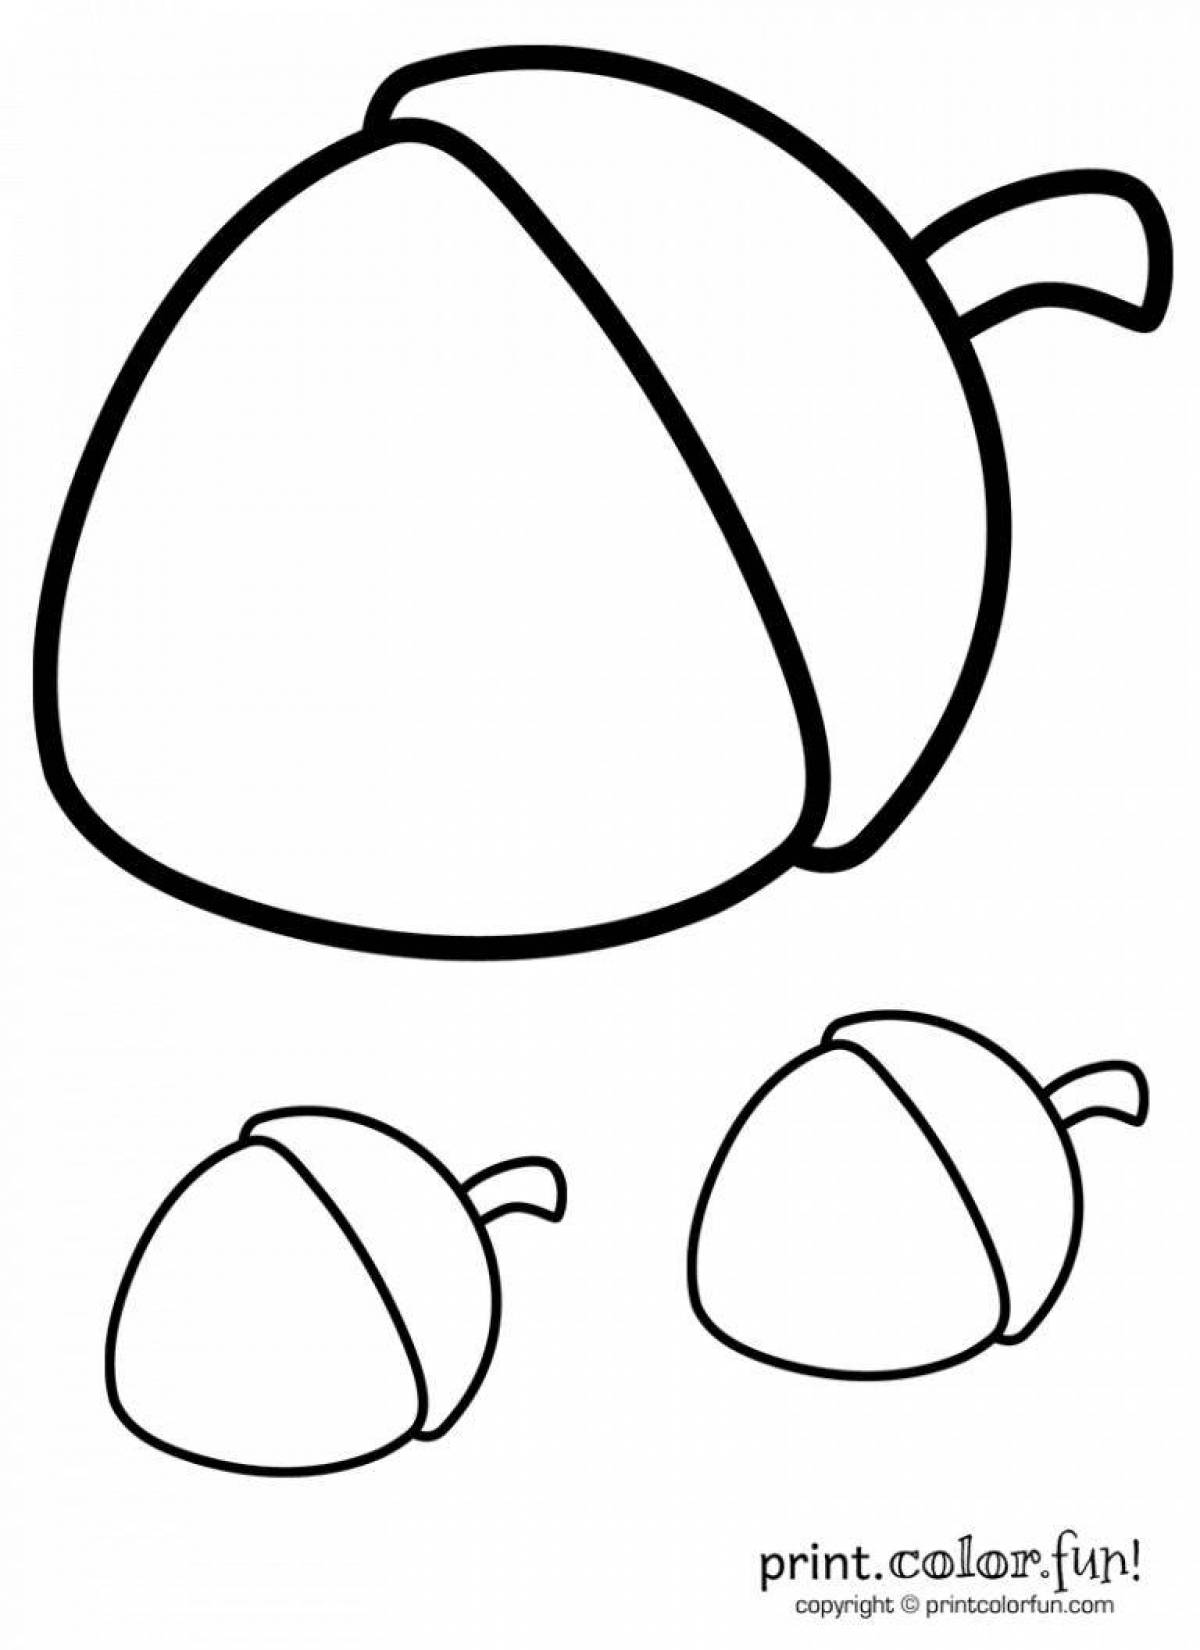 Playful acorn coloring page for kids